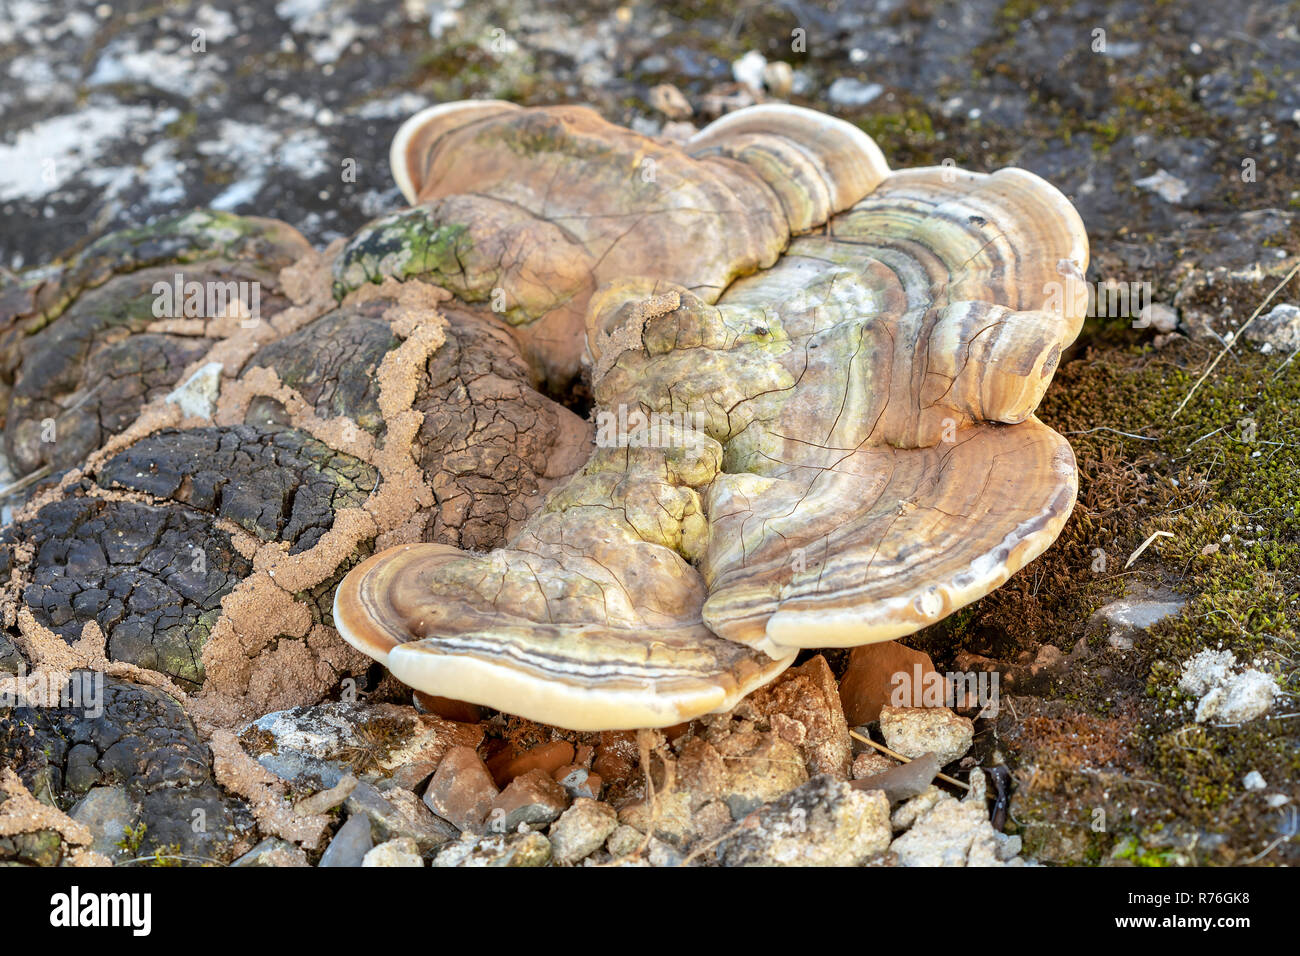 Turkey tail or Polypore mushroom on ground, Scientific name is (Trametes versicolor (L.: Fr.) Que’l.) Stock Photo